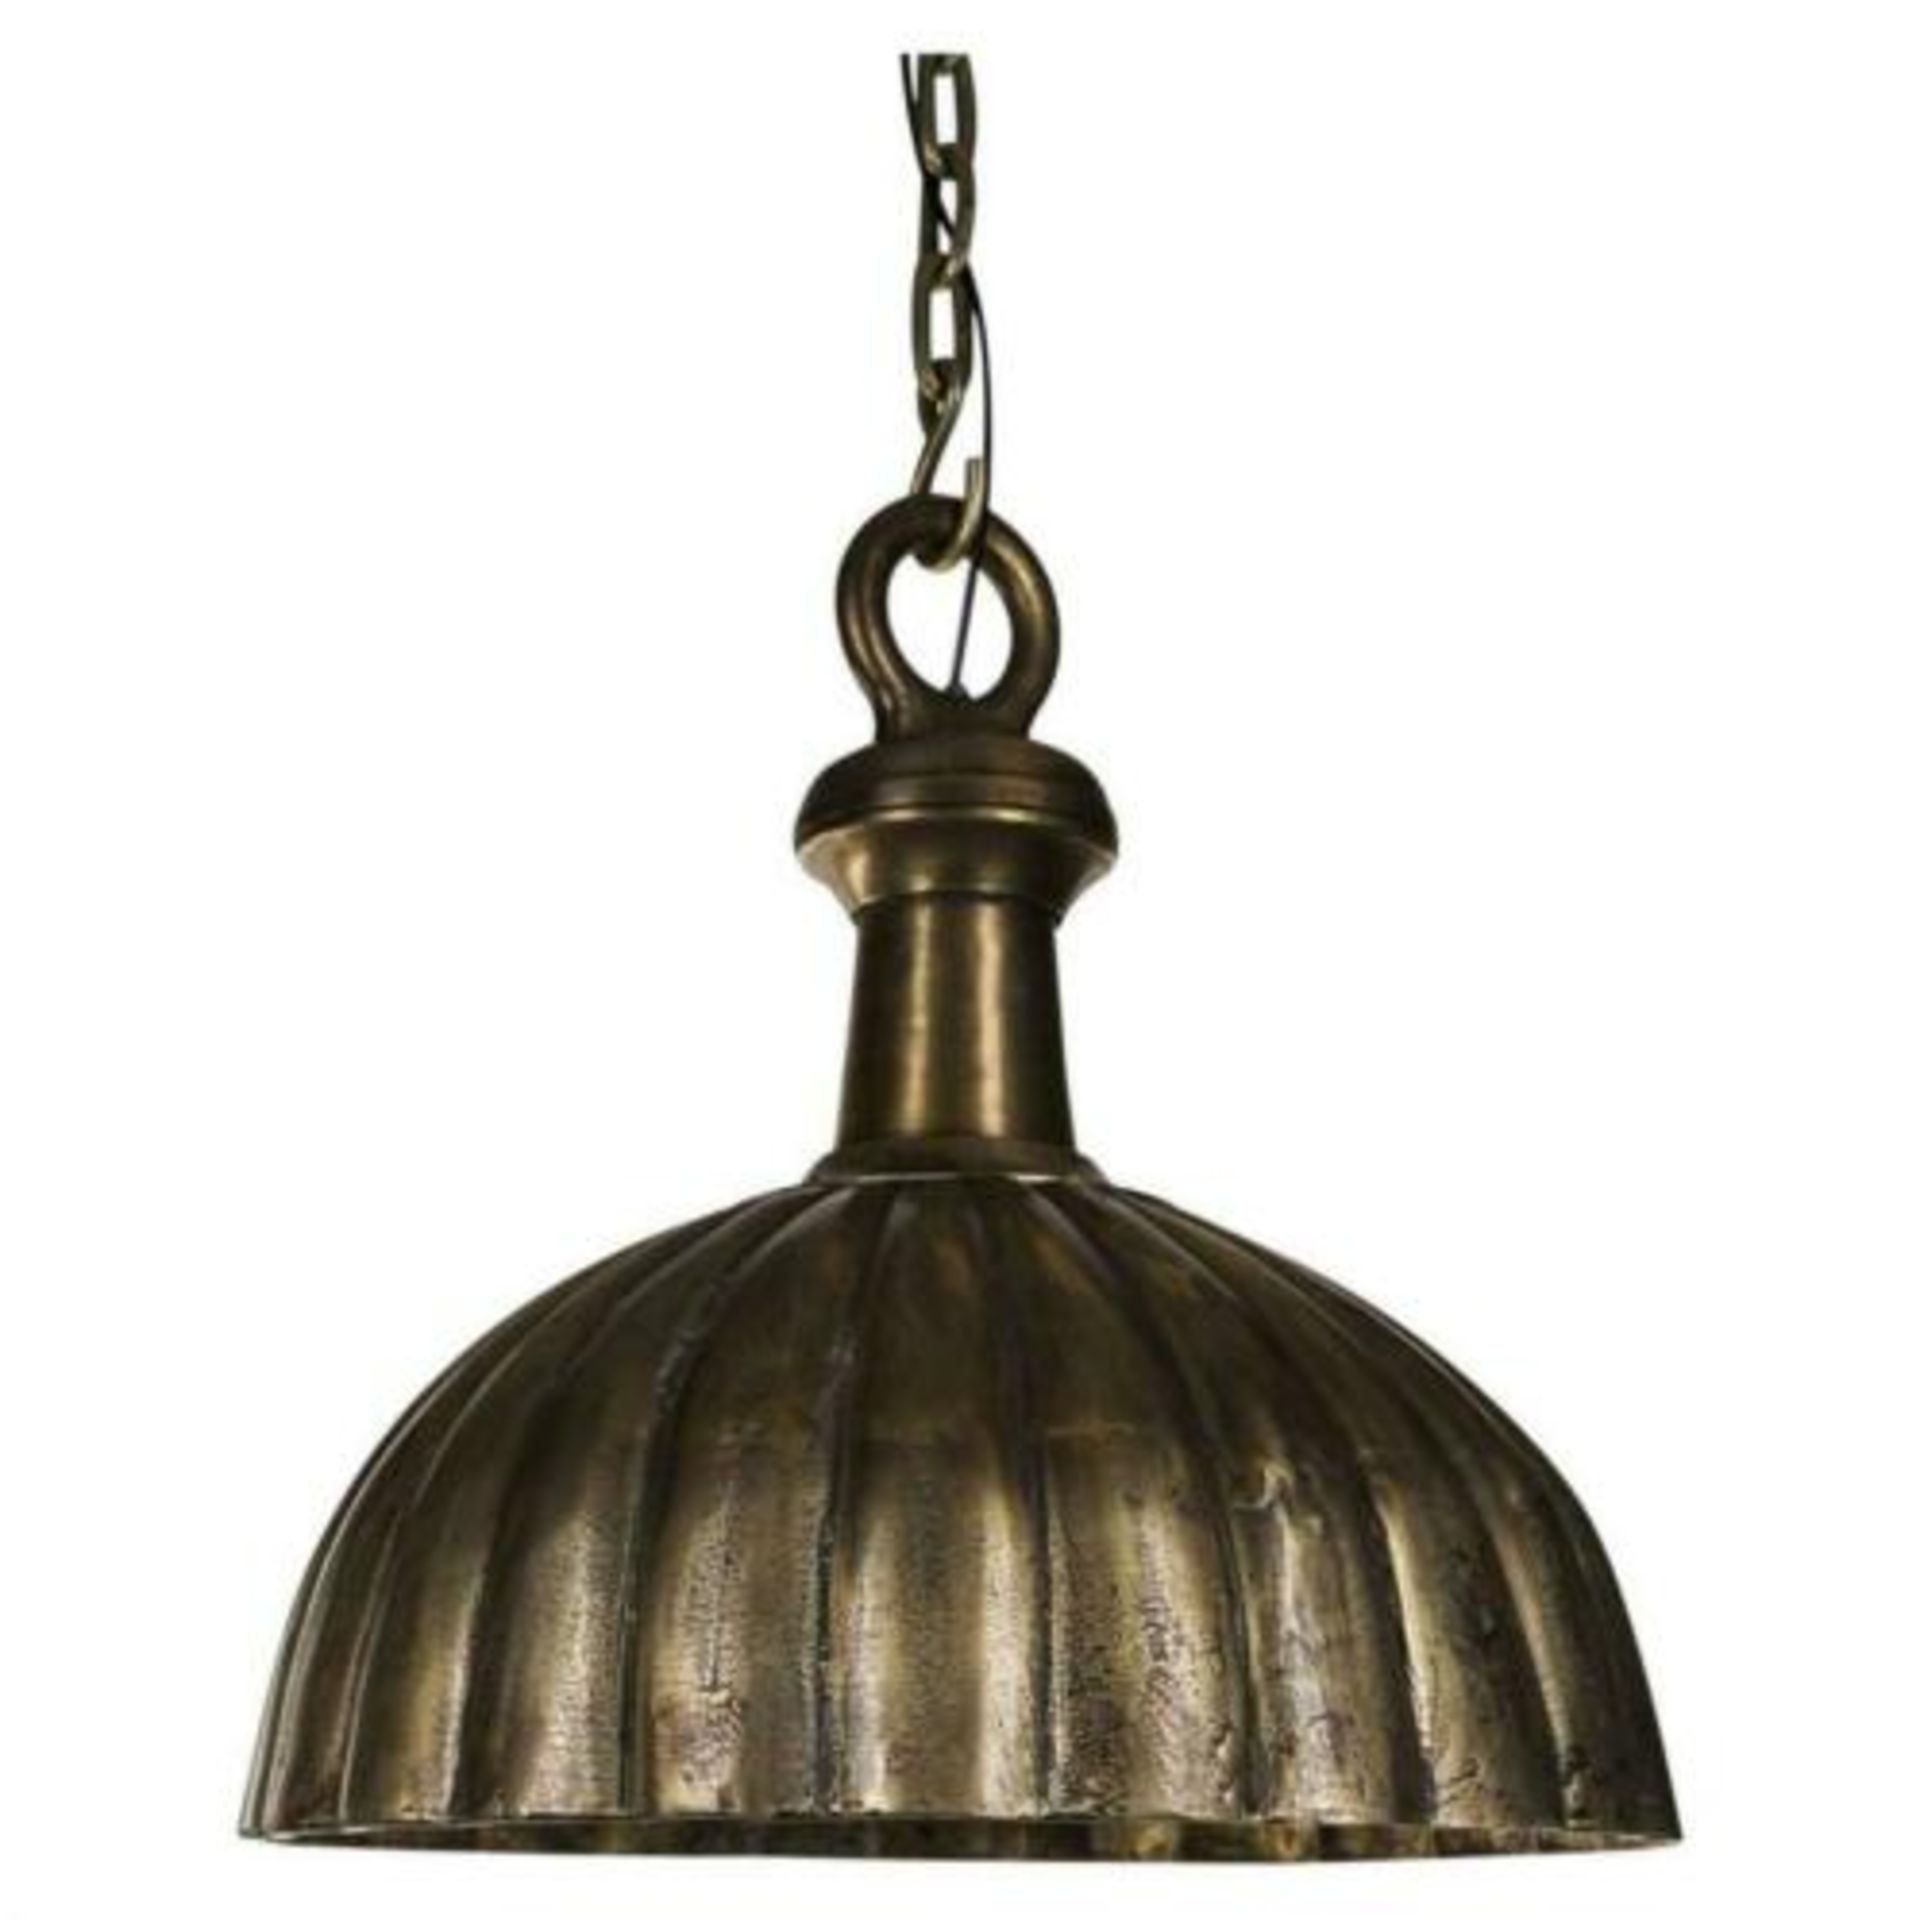 PTMD Aluminium Brass Lamp Hanging Curved M Beautiful Sturdy Aluminium 'Brass Look' Hanging Lamp. The - Image 2 of 2